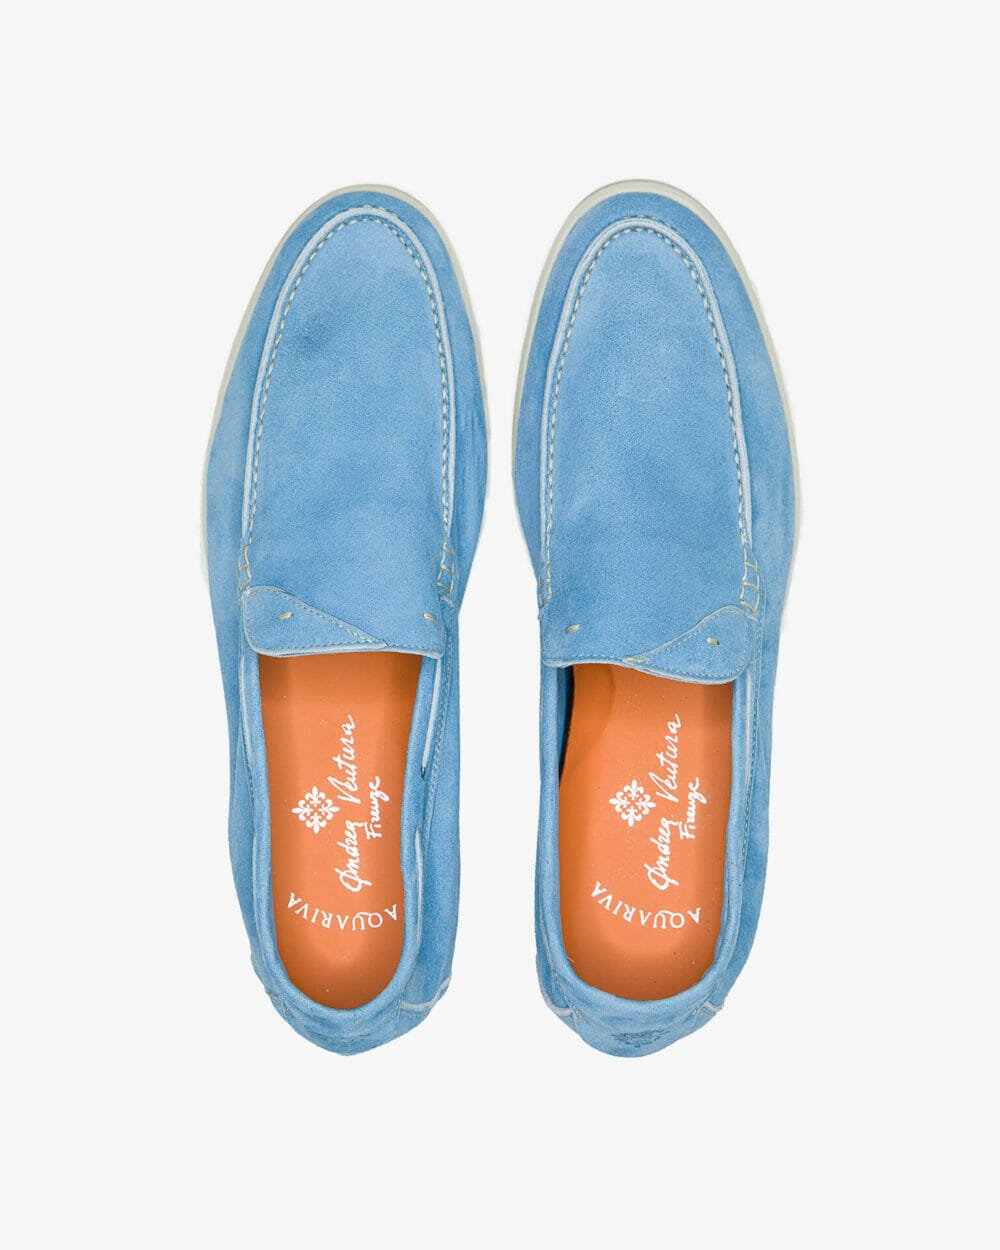 Aquariva-Iseo-azur-suede-sole-from-above